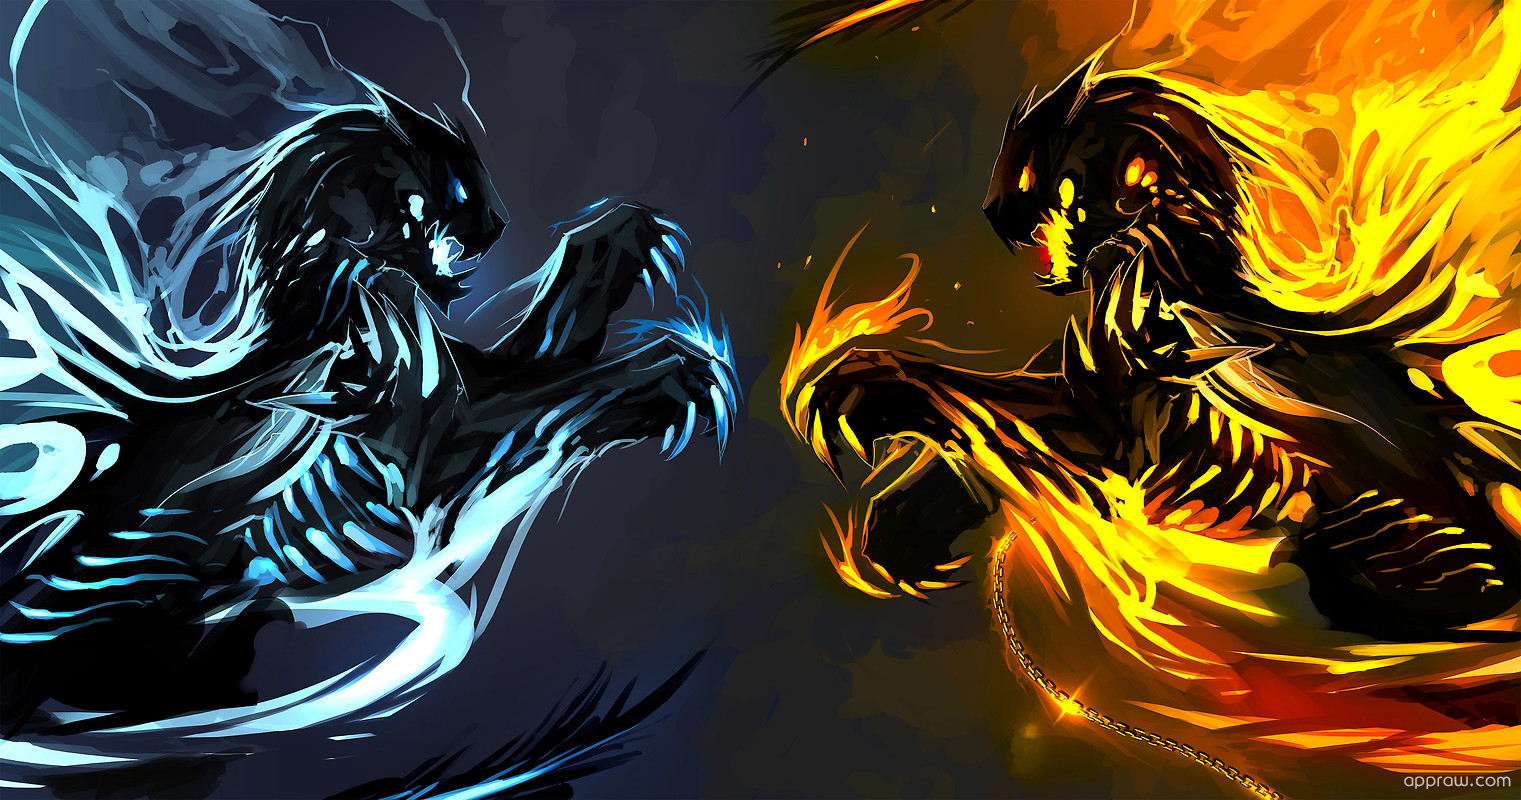 Fire And Ice Art Wallpaper download - Fire And Ice HD Wallpaper - Appraw